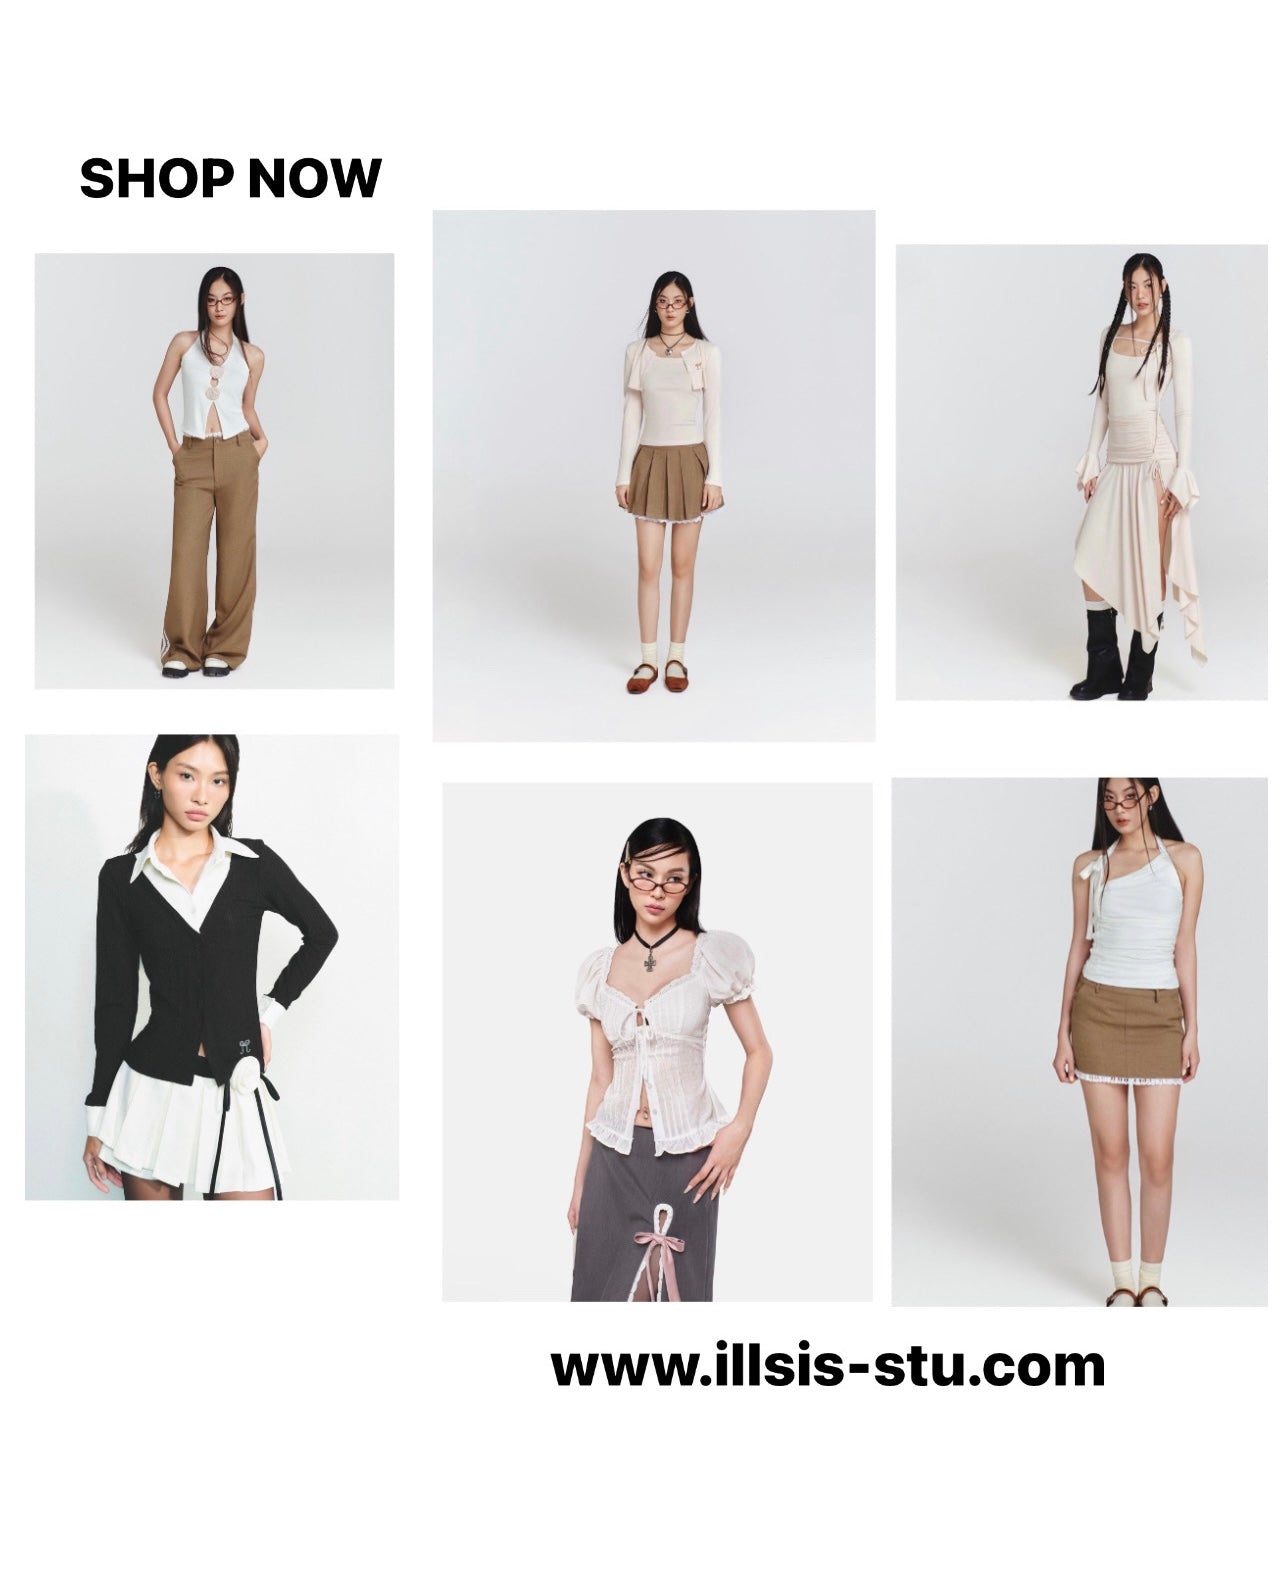 SSHH 1 COLLECTION